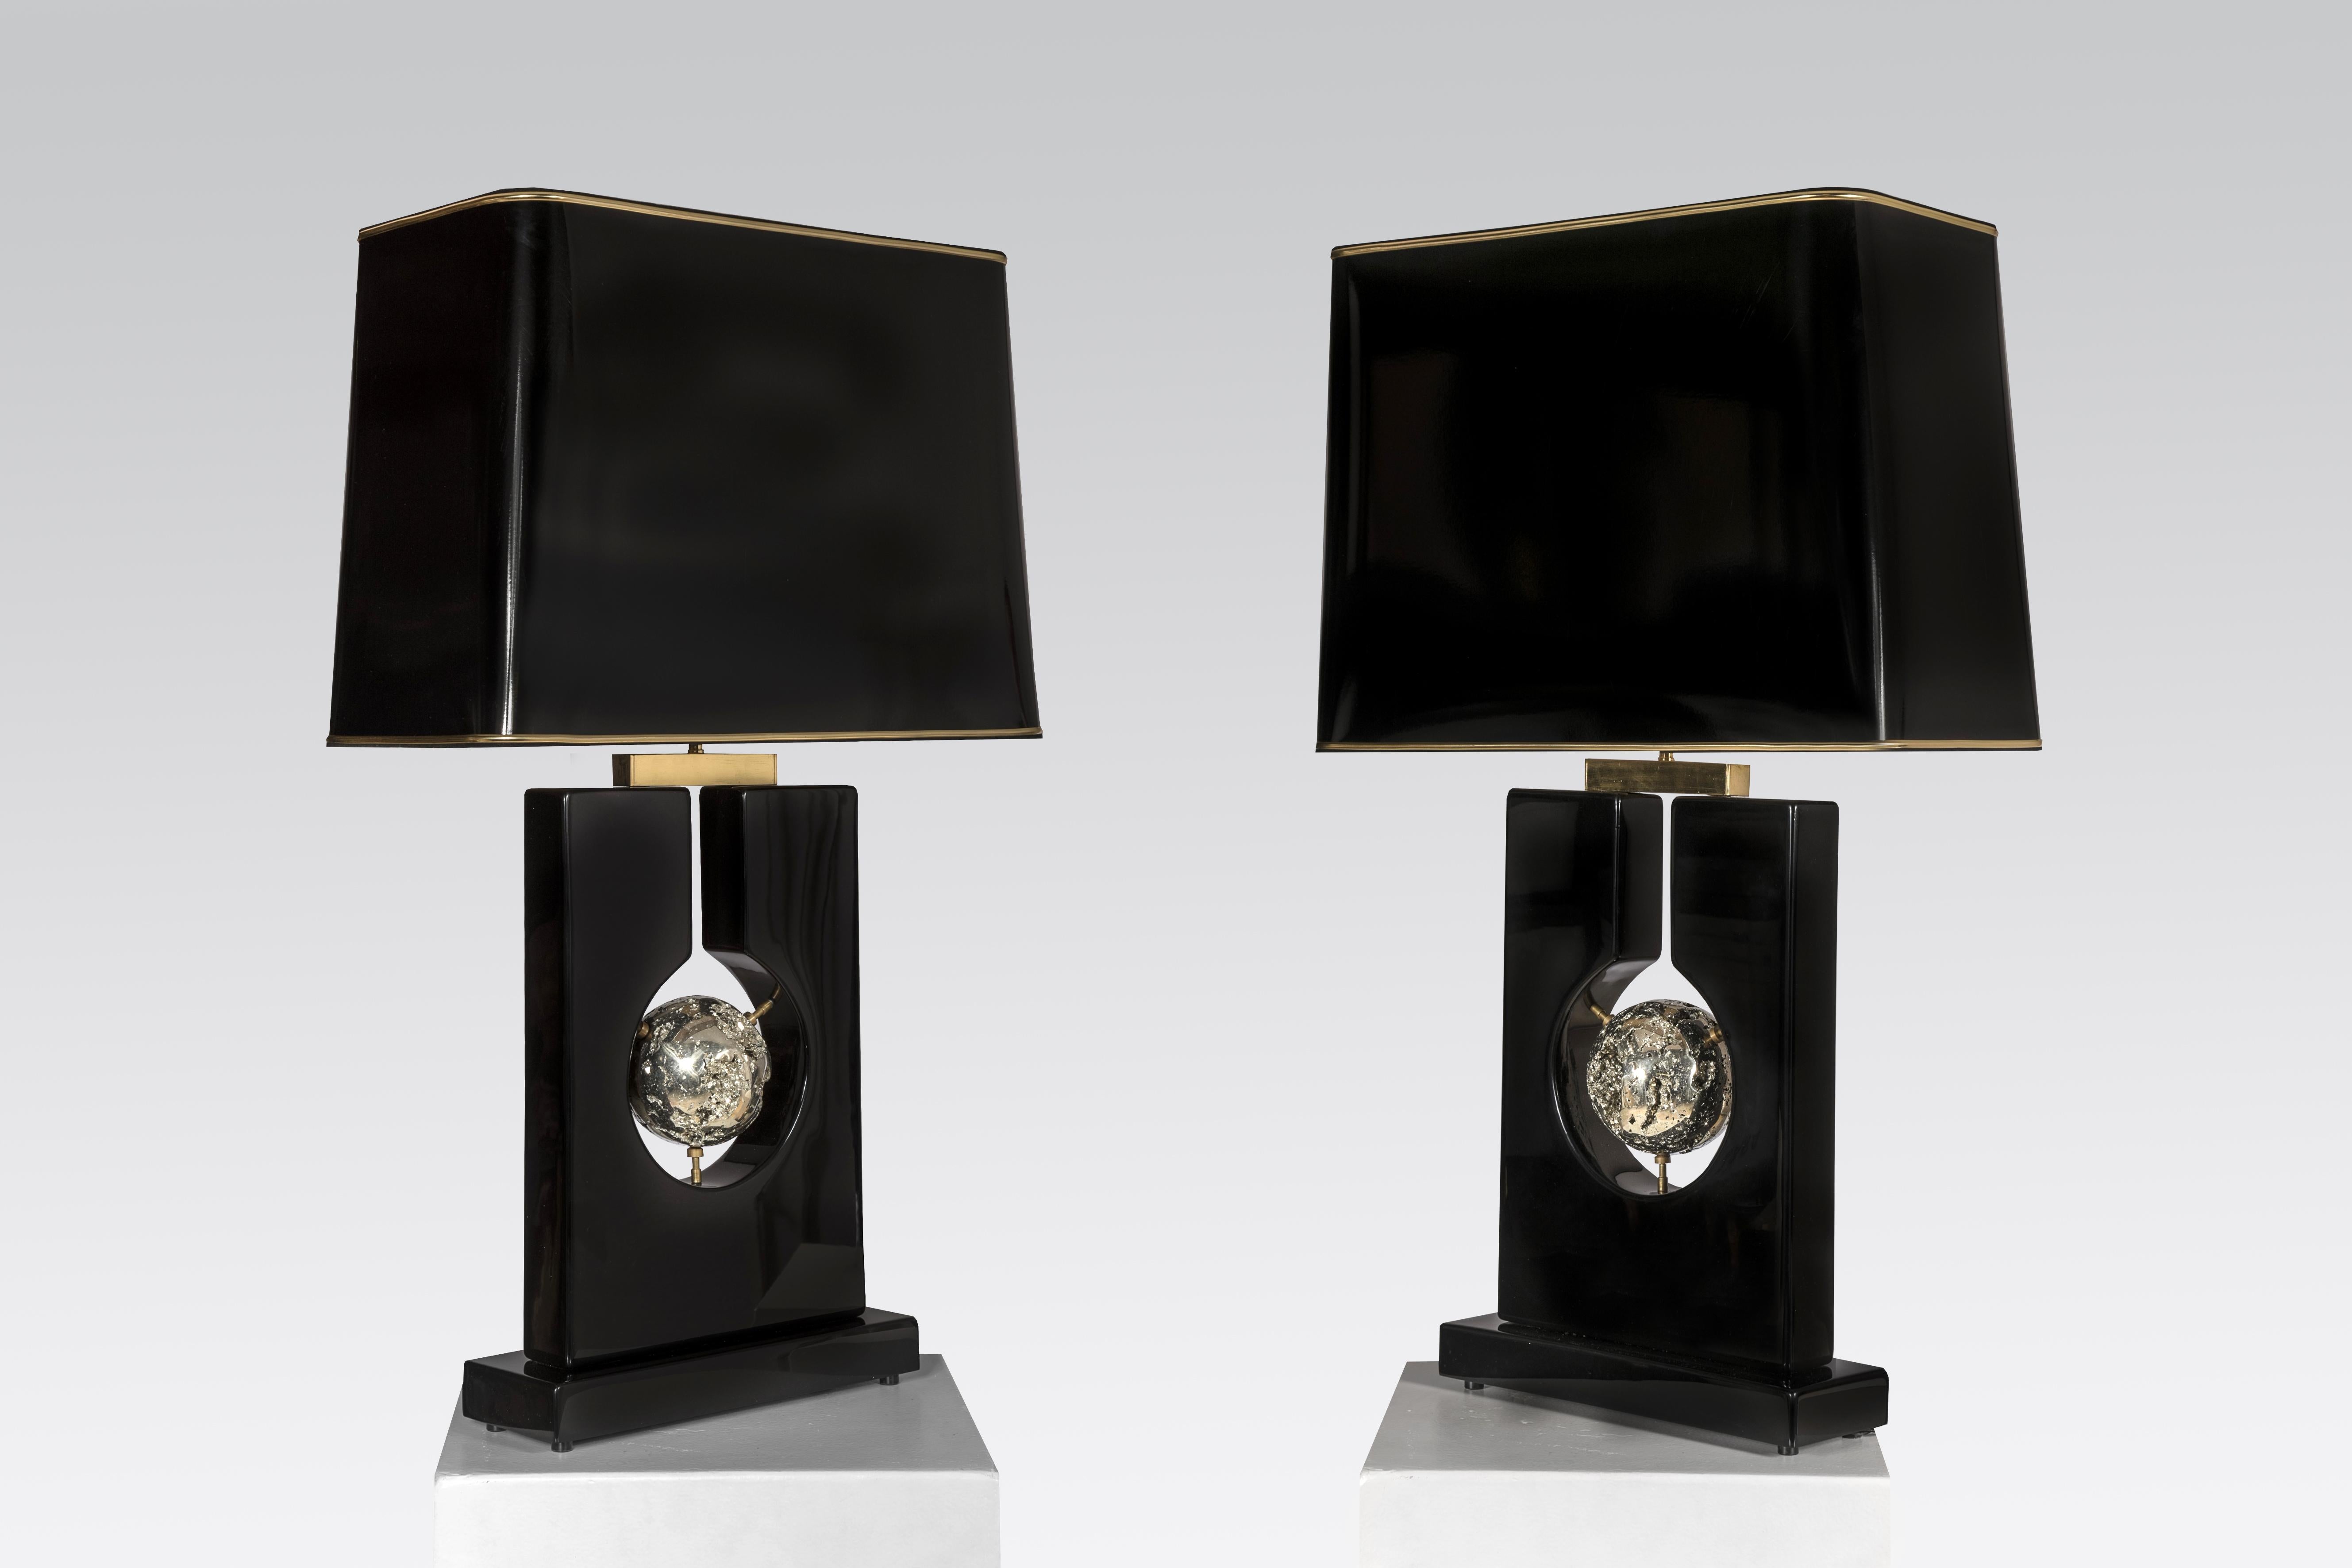 Created to measure by Stan Usel, this pair of black resin table lamps levitation pyrite sphere gemstone. Exceptional craftsmanship with the art of tailor made furniture. This original and unique pieces are signed by the artist and comes with the